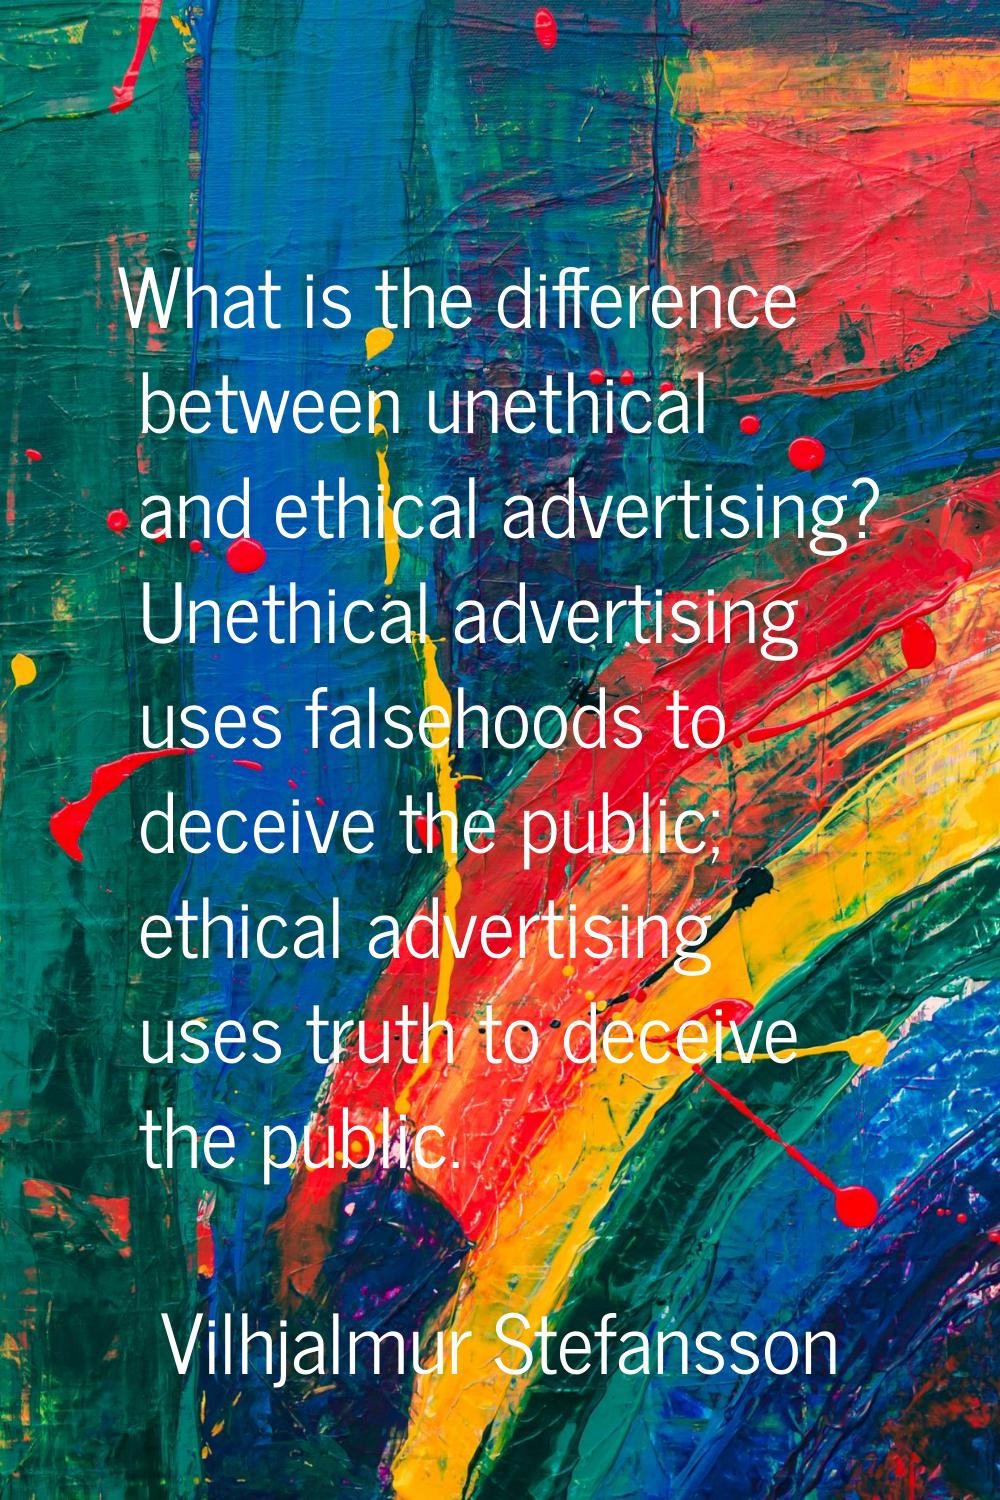 What is the difference between unethical and ethical advertising? Unethical advertising uses falseh